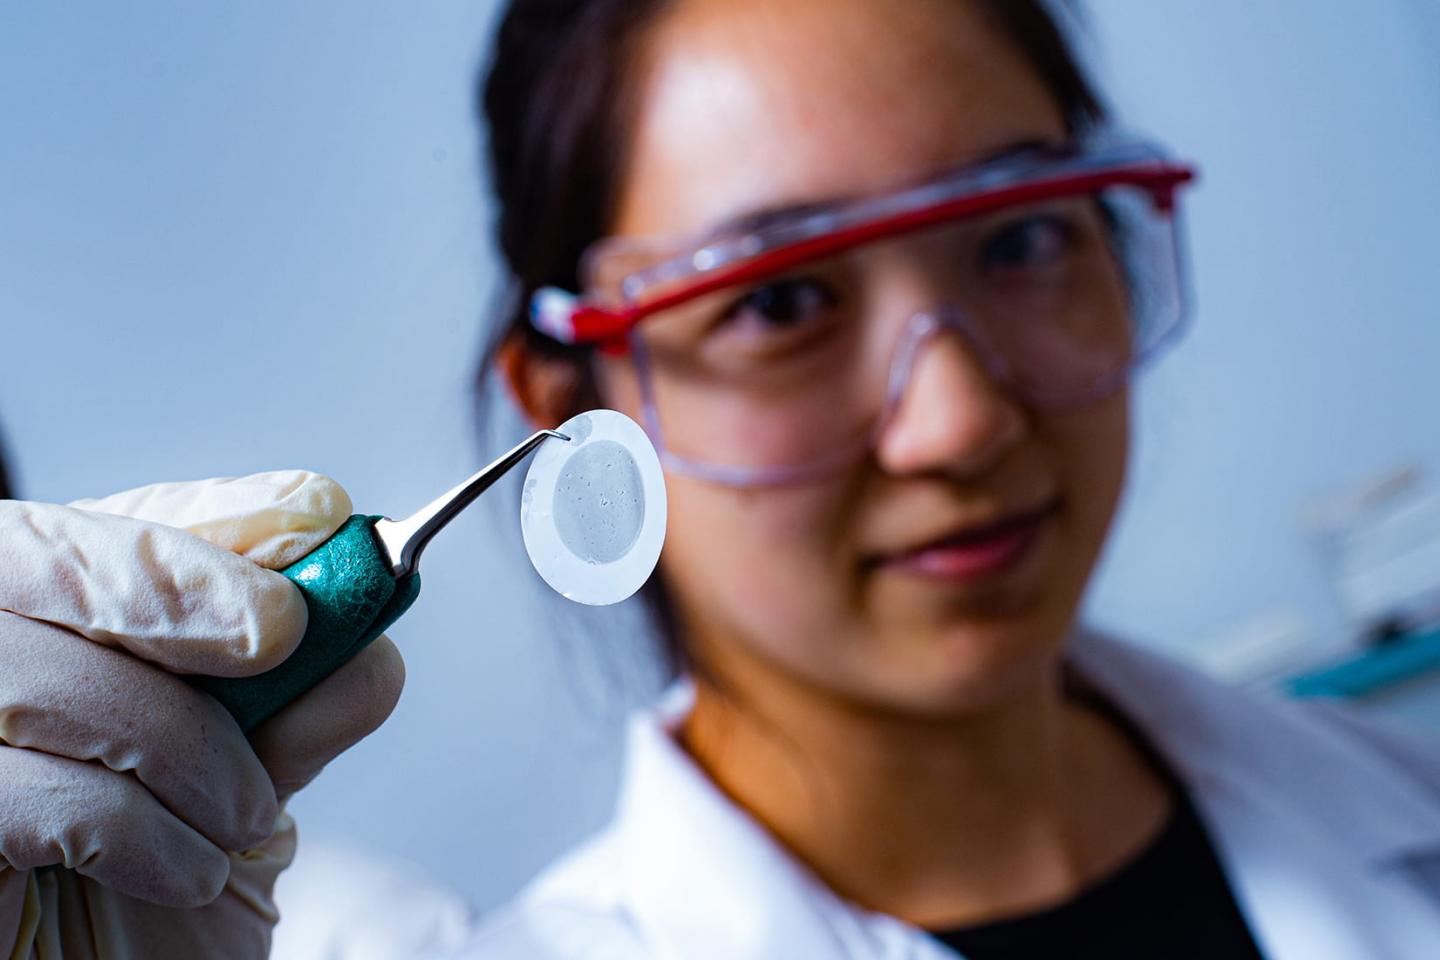 Rice University graduate student Natsumi Komatsu was the first to notice that the alignment of 2D carbon nanotube films corresponds to grooves in the filter paper beneath the films. Source: Jeff Fitlow/Rice University